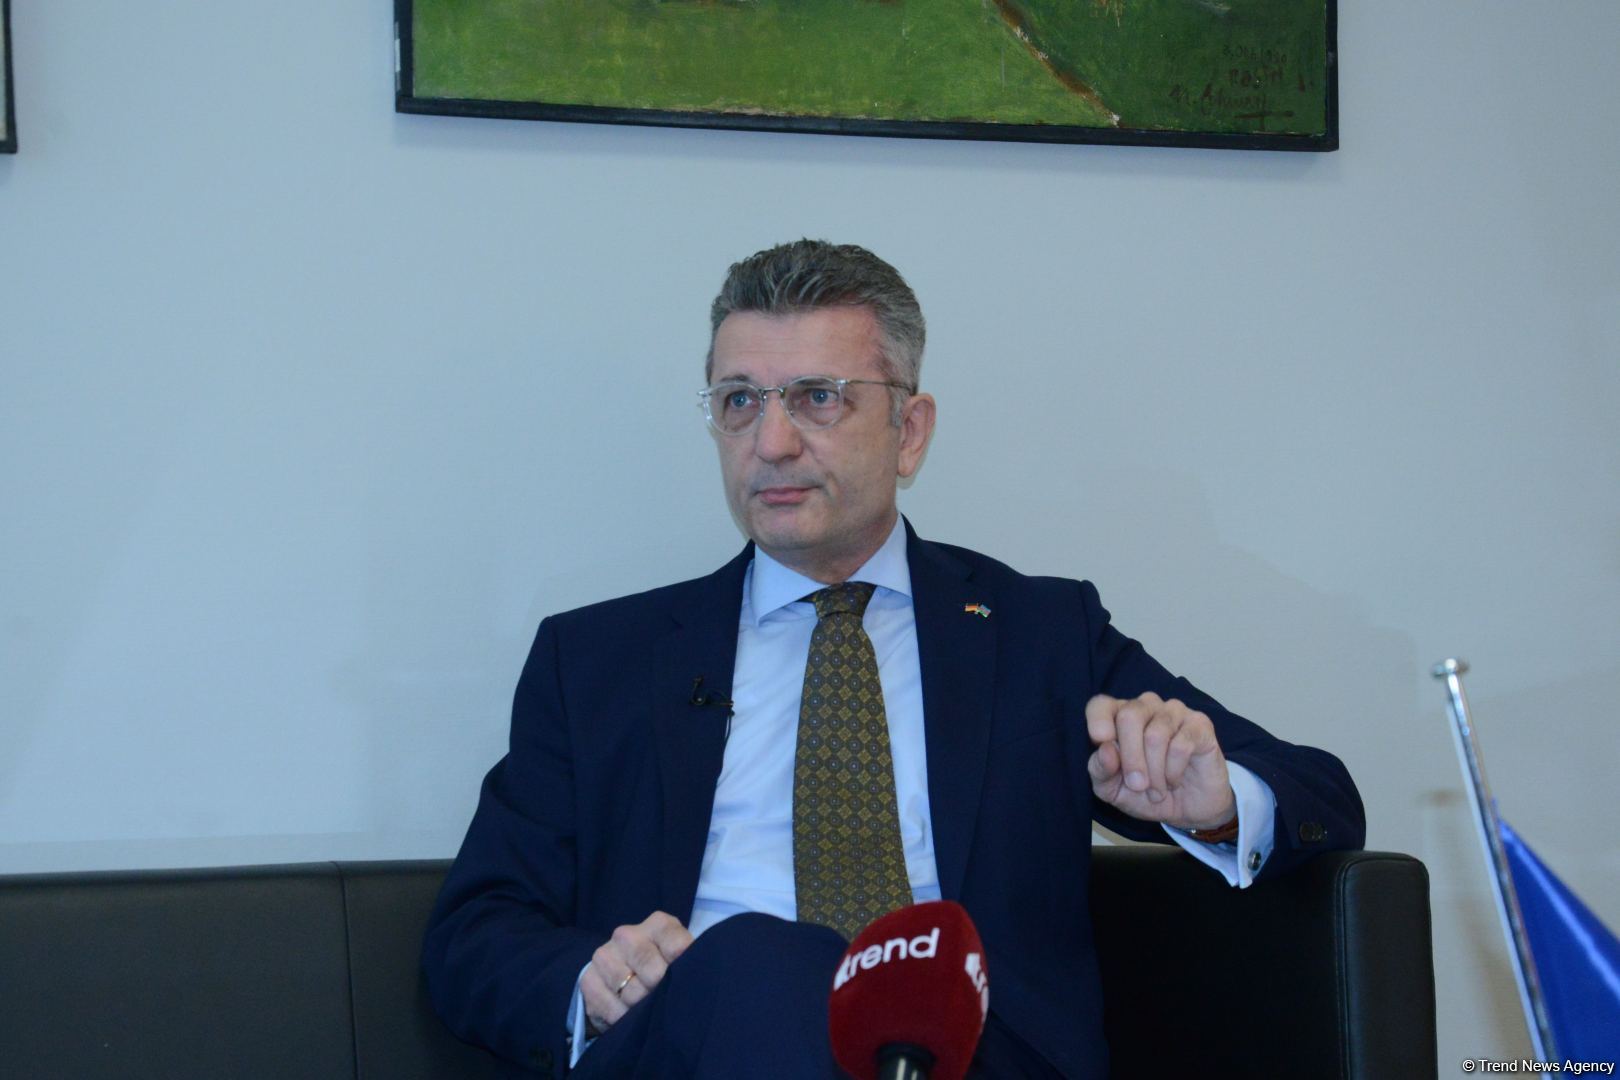 Germany looks forward to continue developing dynamic relations with Azerbaijan - Ambassador Horlemann (Interview) (PHOTO/VIDEO)